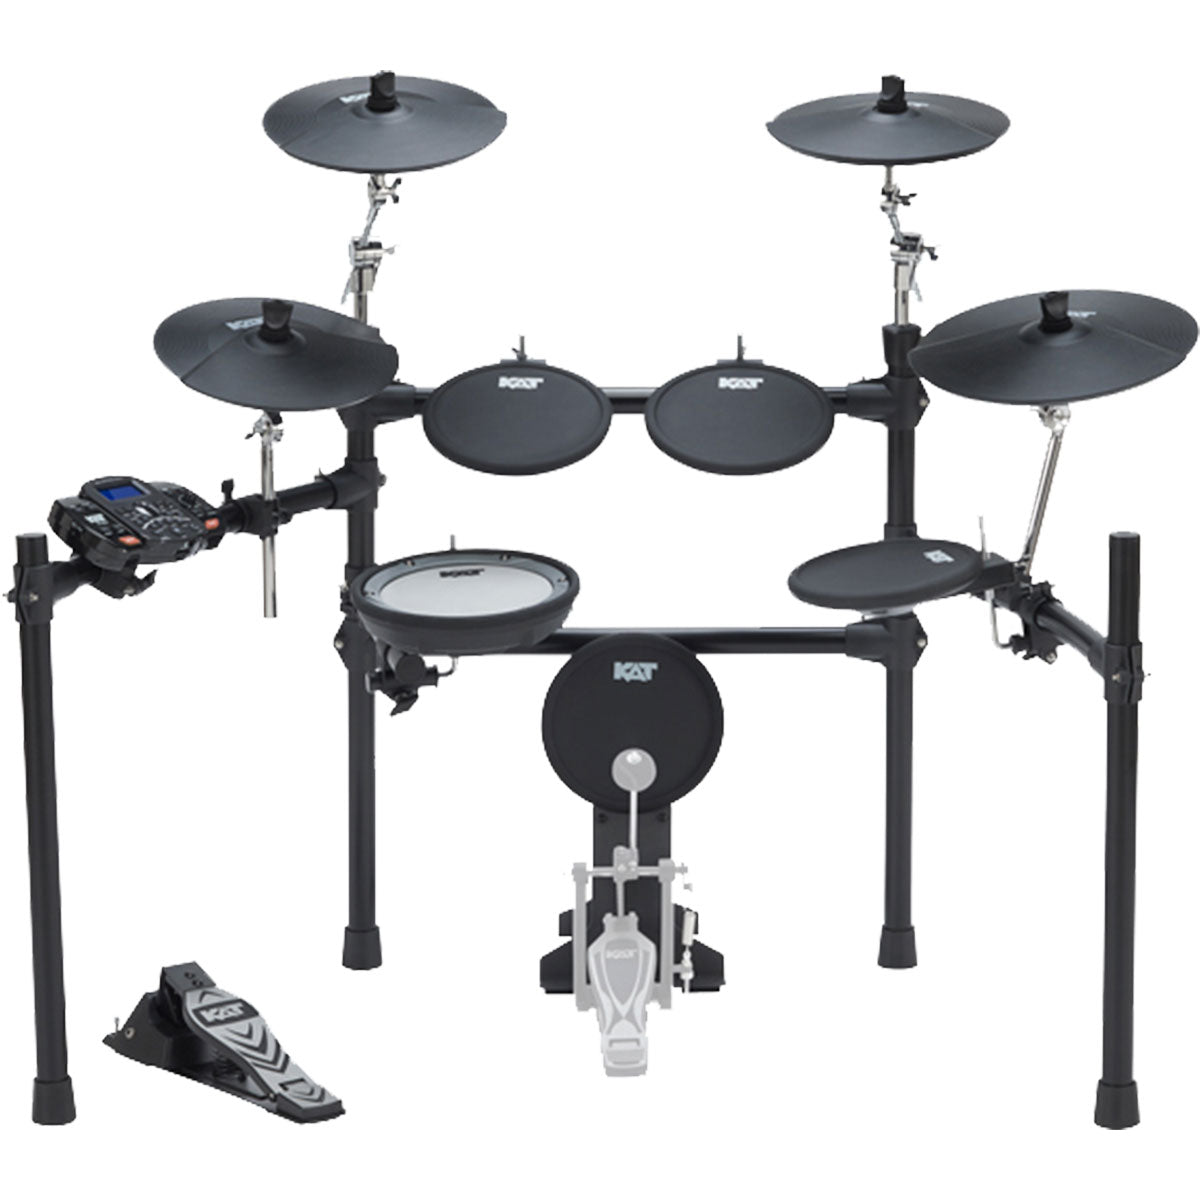 Back view of Kat Percussion KT-200 Electronic Drum Set